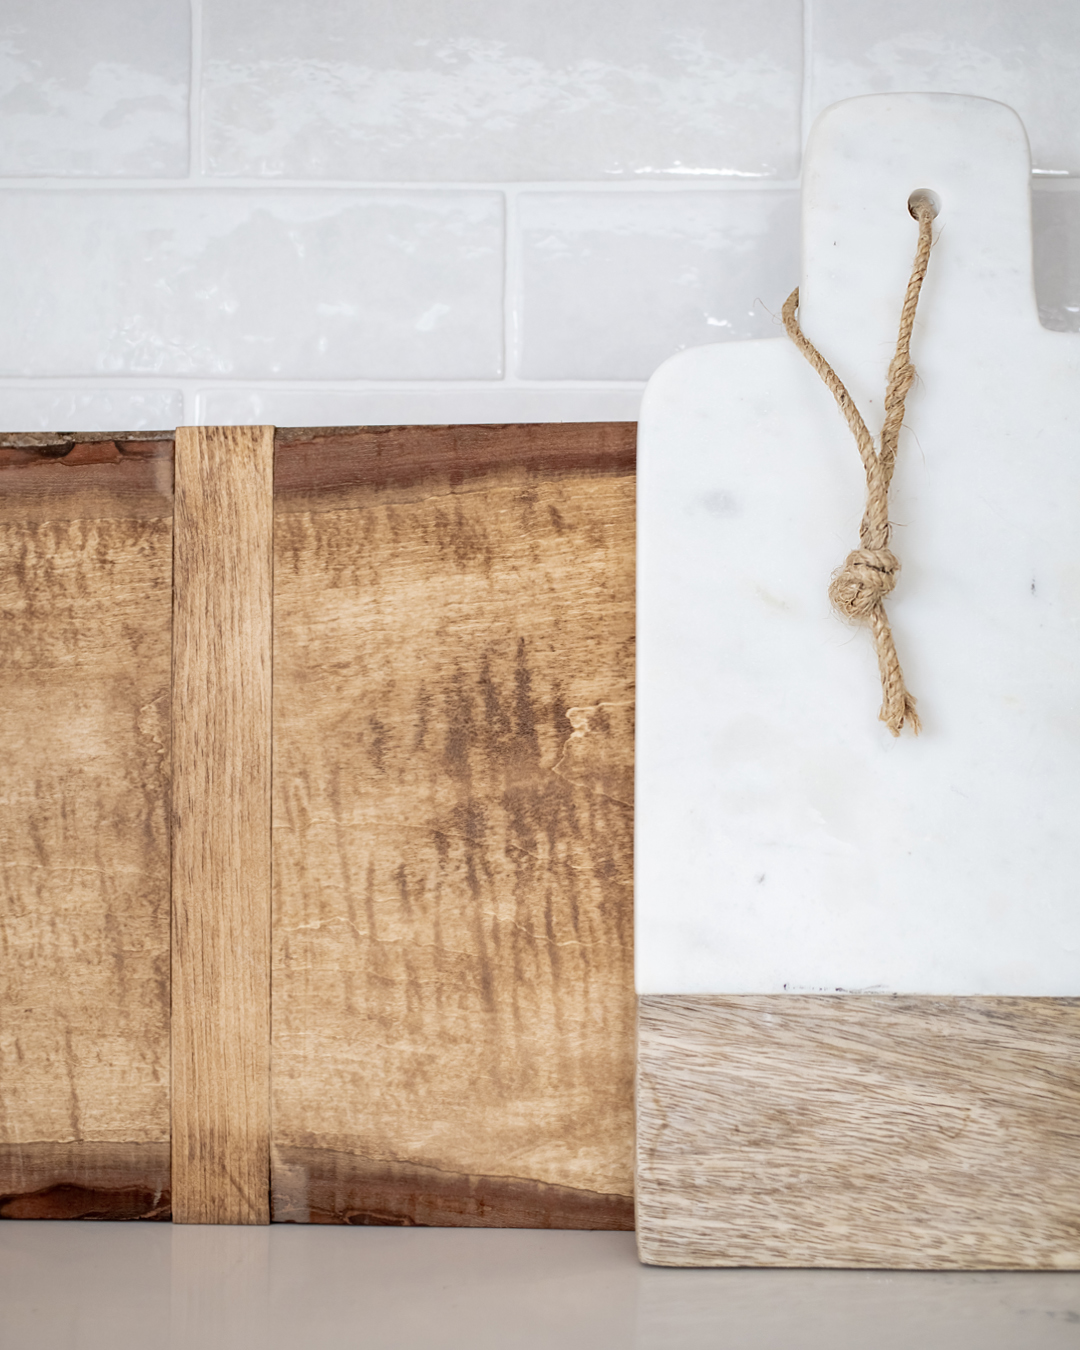 How to make your own DIY giant cutting board to use as kitchen decor. Make it exactly the size you need for much less than you'd pay to buy one!